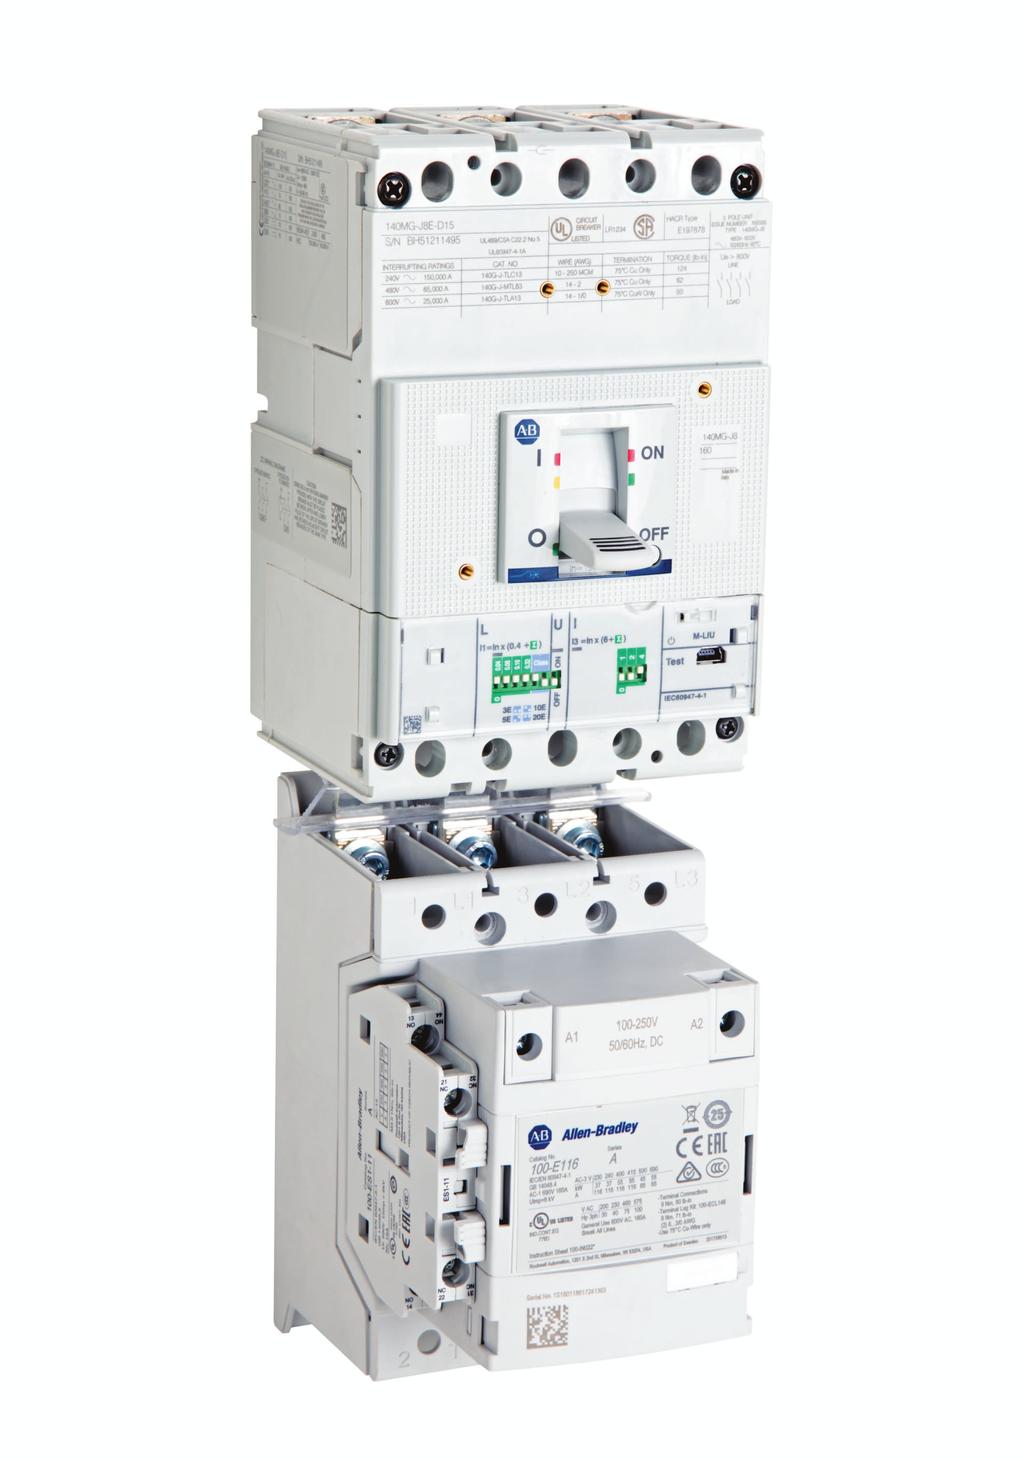 Large IEC Contactors 100-E / 104-E New designs reduce width and weight saving panel space.